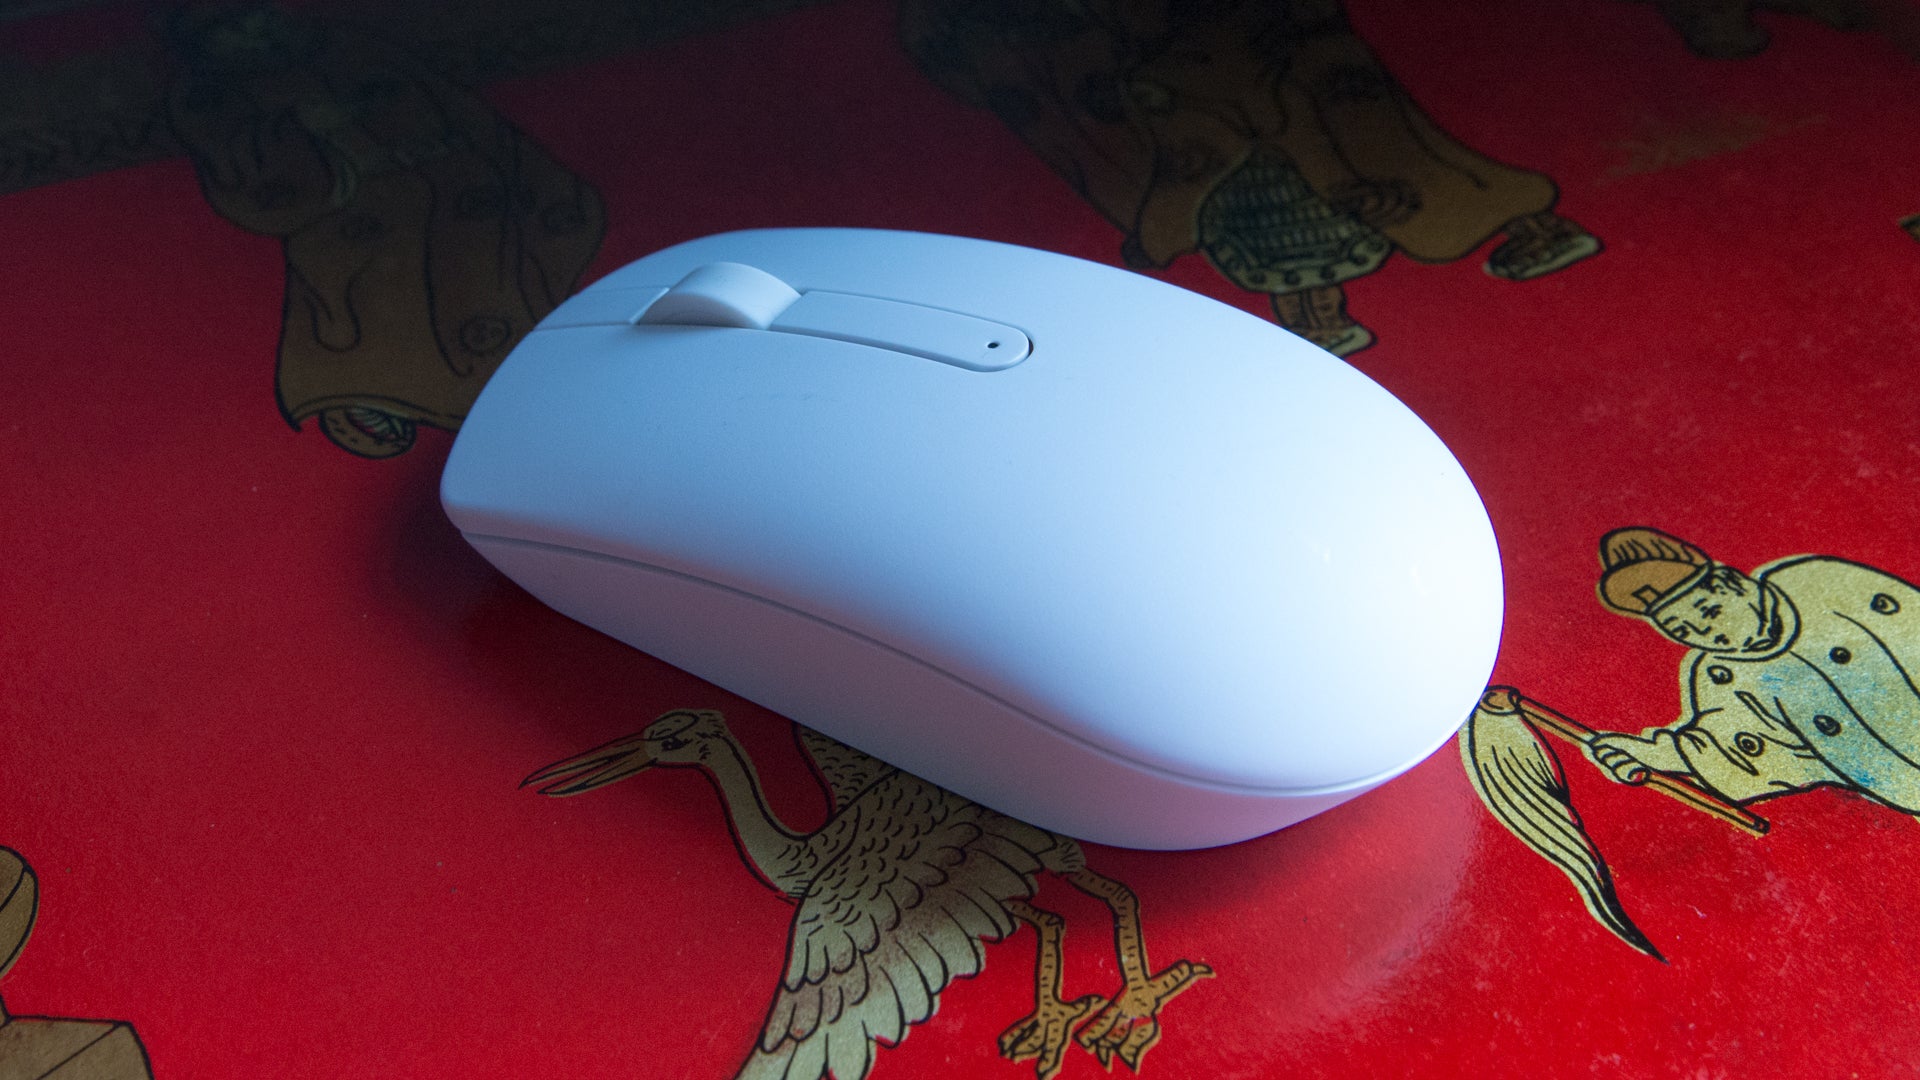 White computer mouse on patterned red surface.